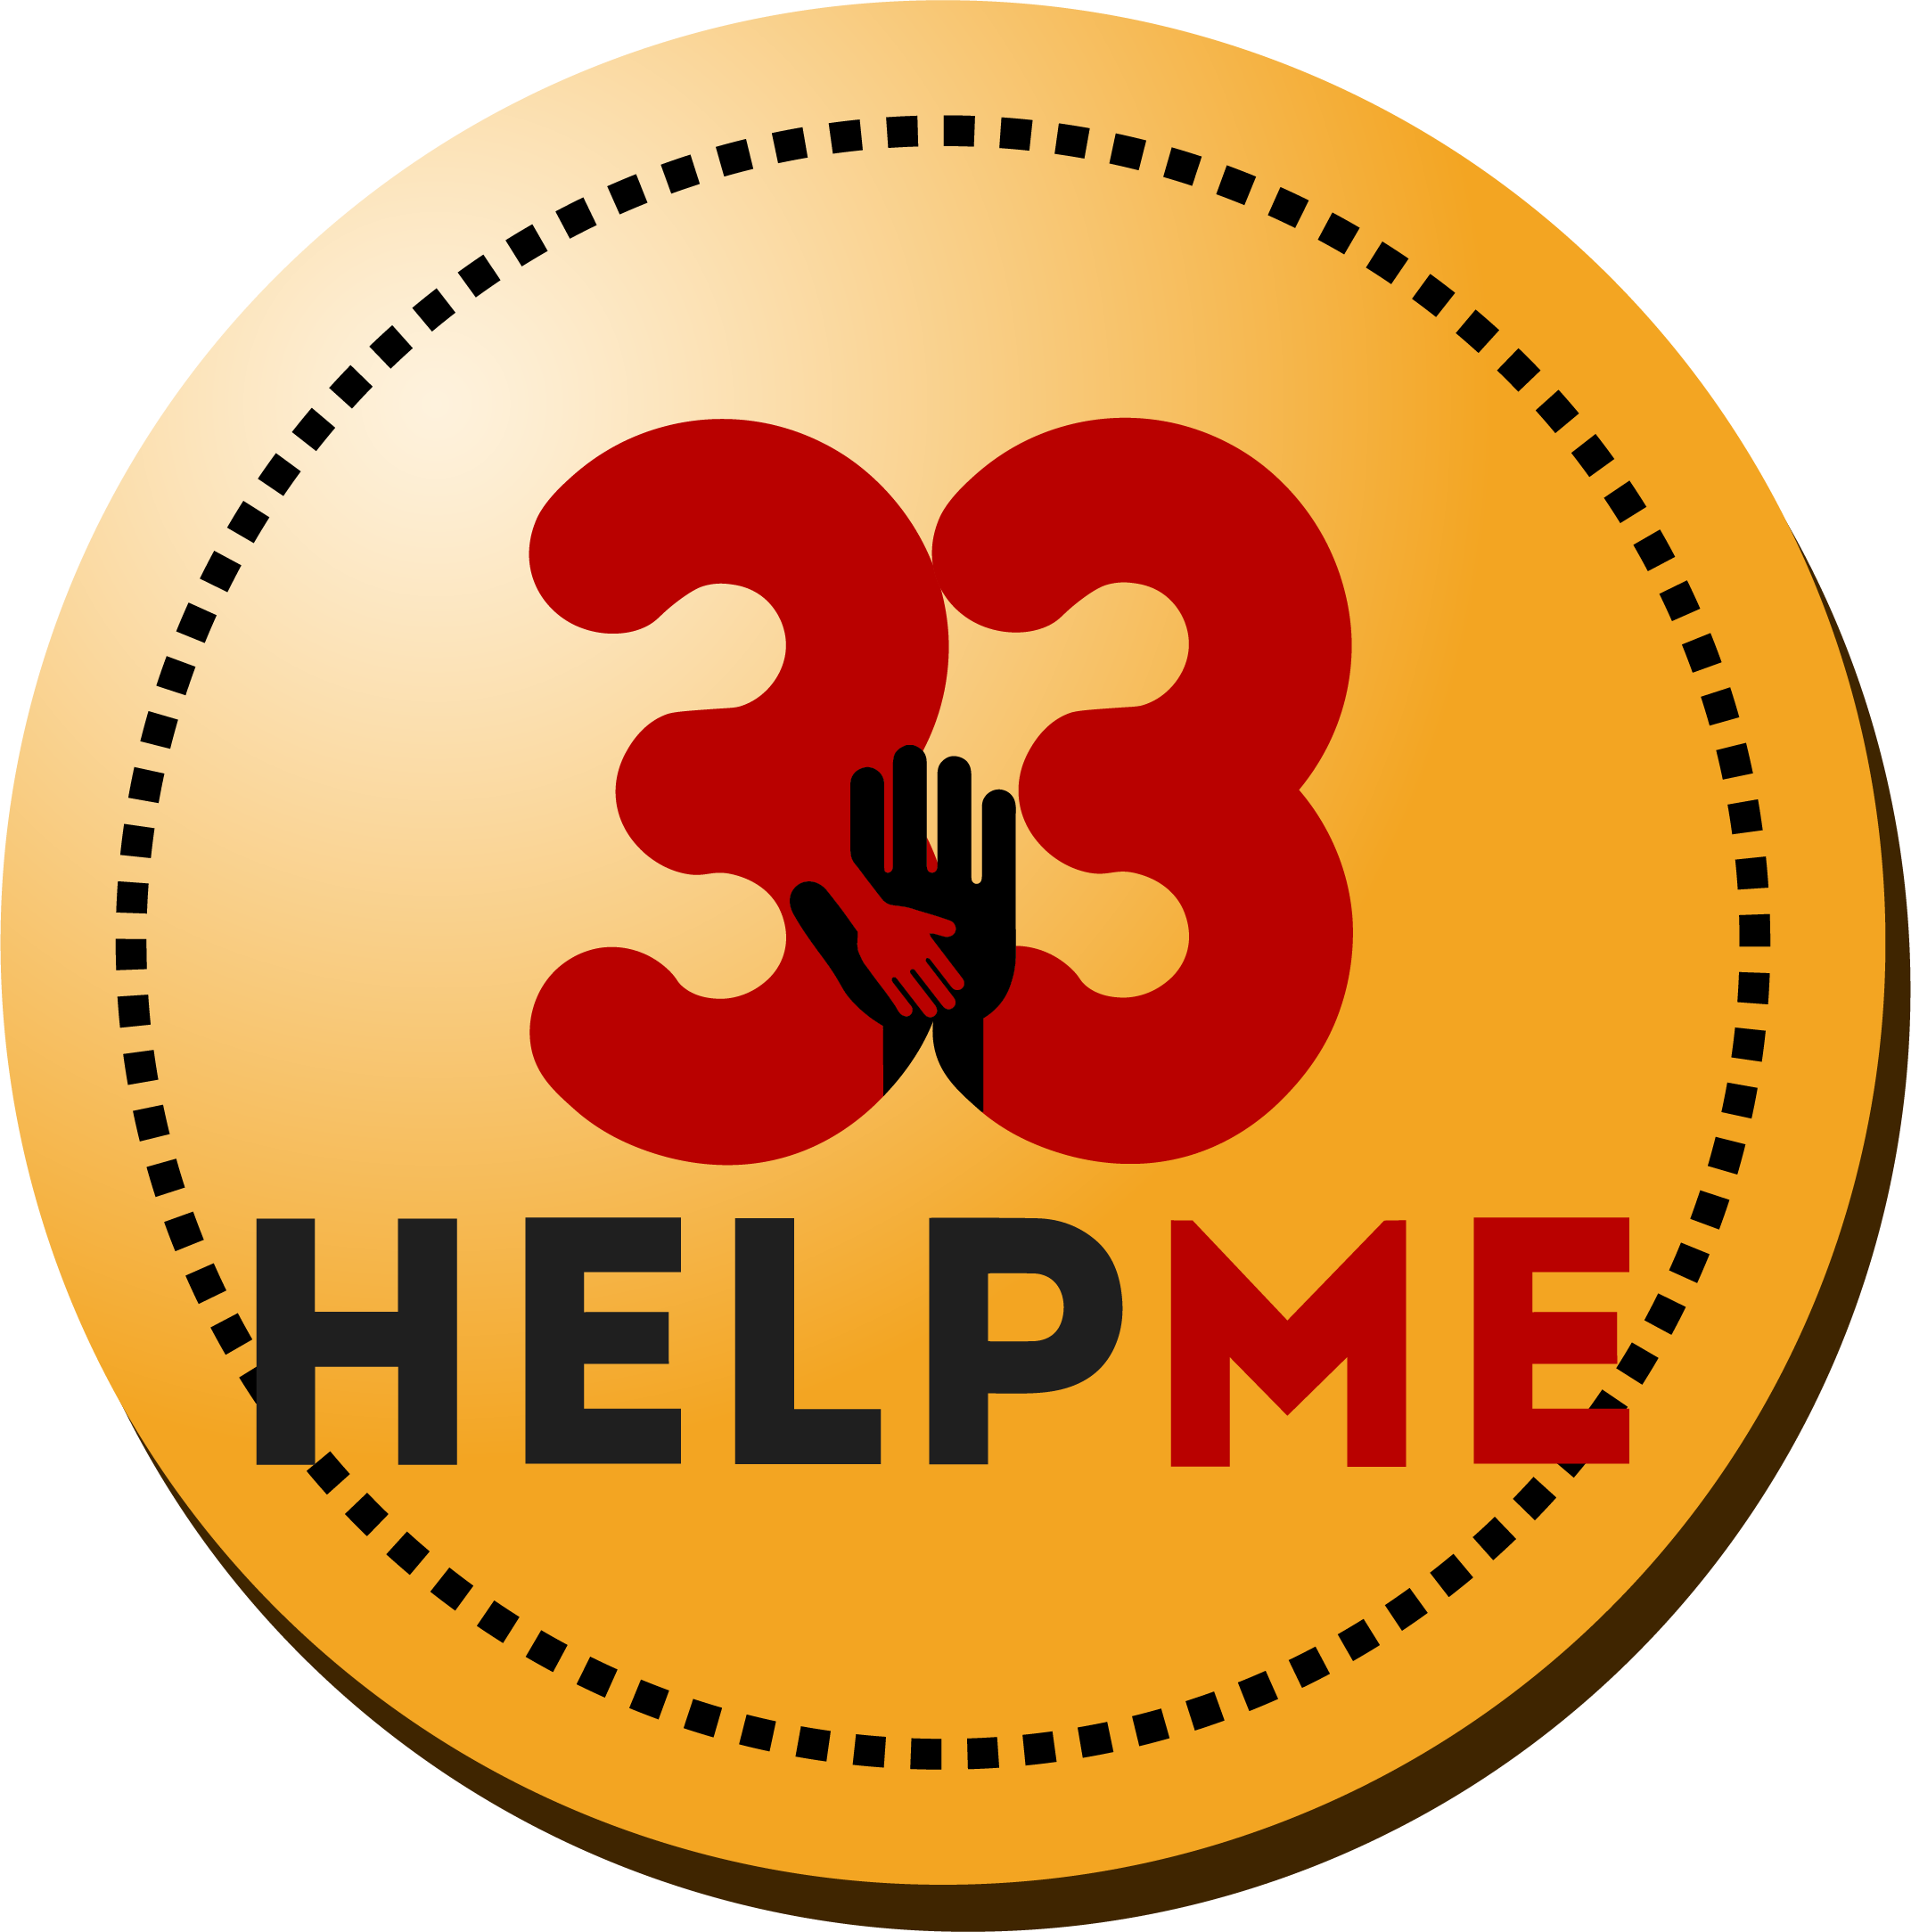 This is the 33HelpME button that is installed on the the teacher's computer